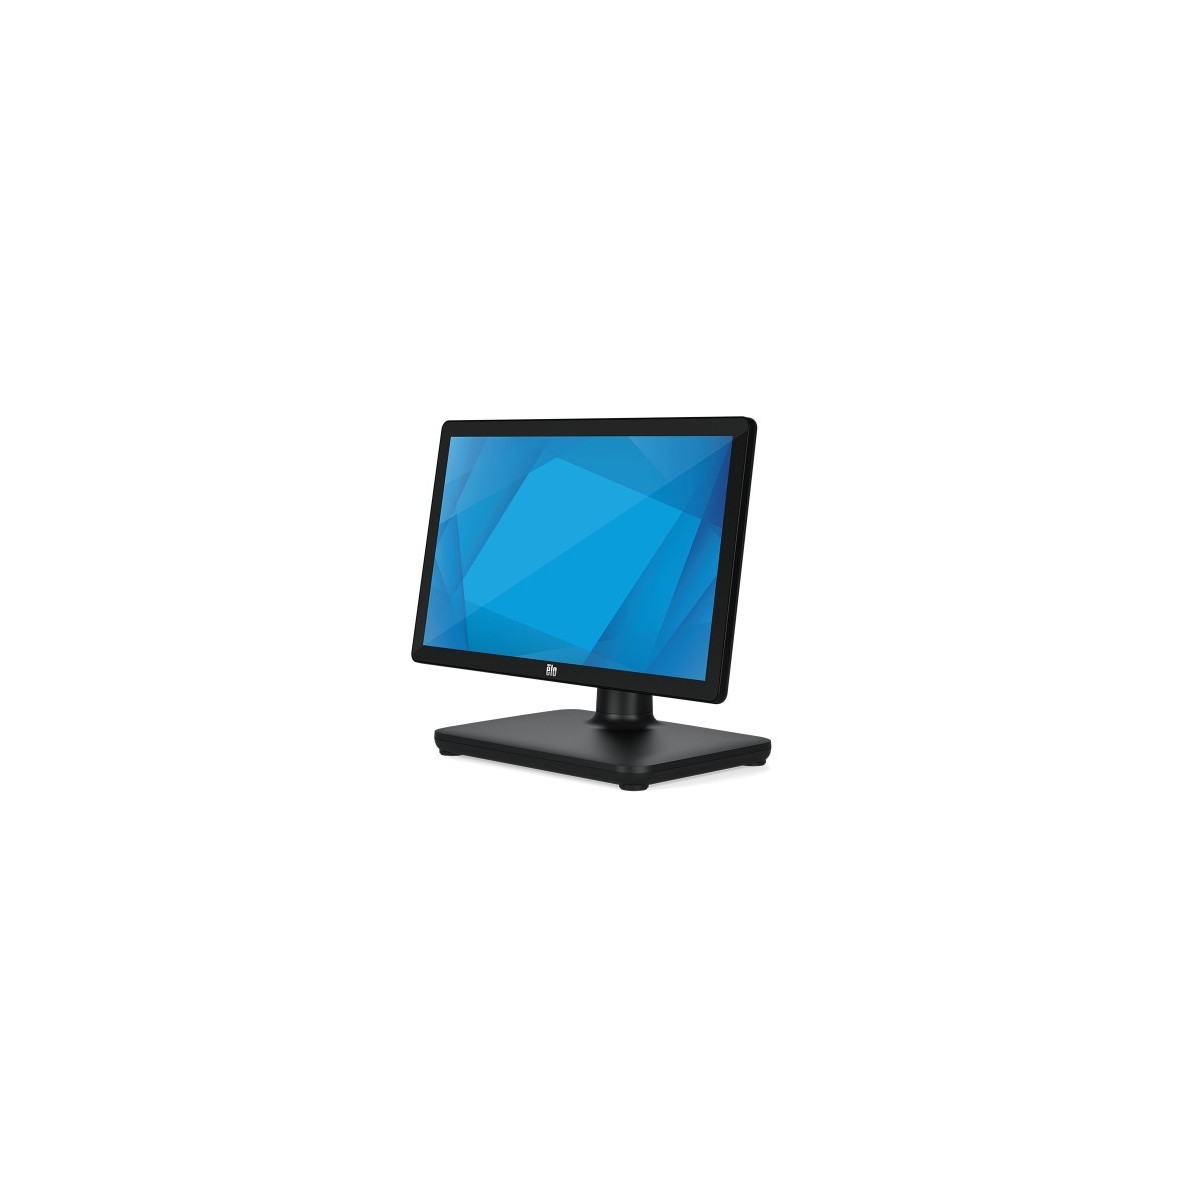 Elo Touch Solutions Elo Touch Solution E937720 - 54.6 cm (21.5") - 1920 x 1080 pixels - LCD - 212.5 cd/m² - Projected capacitive